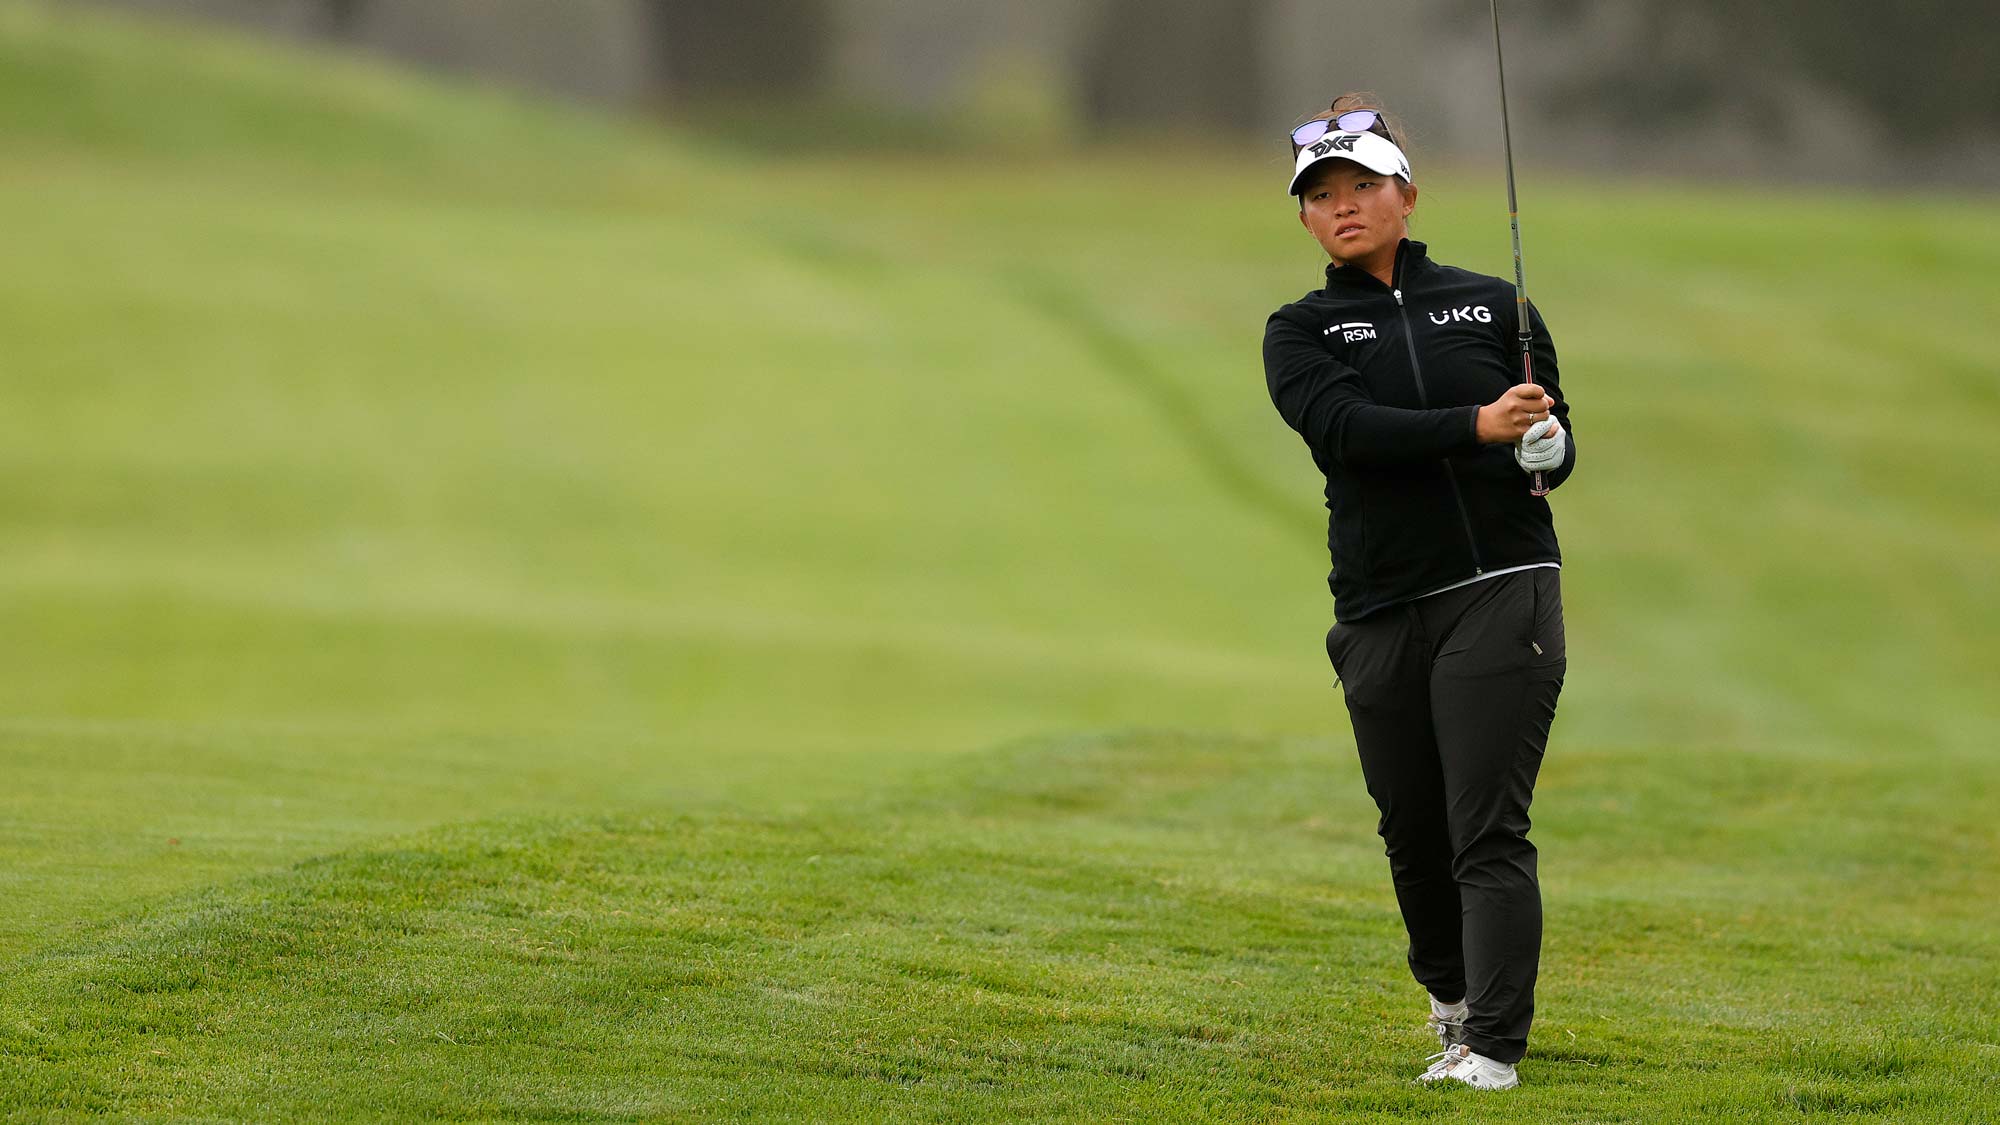 Megan Khang hits an approach shot on the second hole during the second round of the 76th U.S. Women's Open Championship